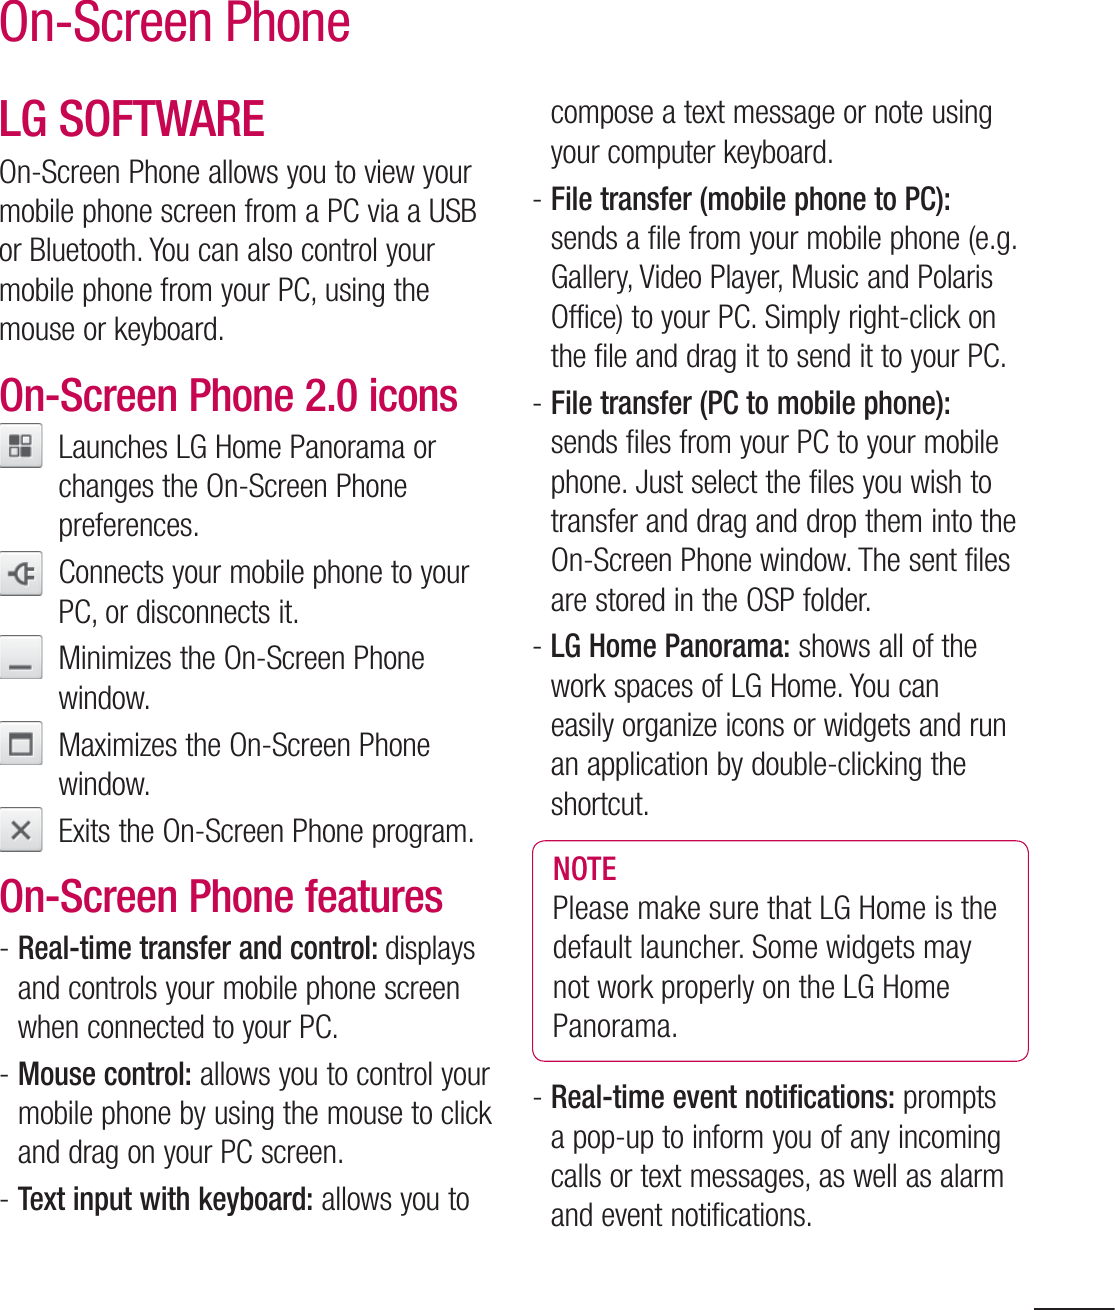 99On-Screen PhoneLG SOFTWAREOn-Screen Phone allows you to view your mobile phone screen from a PC via a USB or Bluetooth. You can also control your mobile phone from your PC, using the mouse or keyboard.On-Screen Phone 2.0 icons   Launches LG Home Panorama or changes the On-Screen Phone preferences.   Connects your mobile phone to your PC, or disconnects it.   Minimizes the On-Screen Phone window.   Maximizes the On-Screen Phone window.   Exits the On-Screen Phone program.On-Screen Phone features-  Real-time transfer and control: displays and controls your mobile phone screen when connected to your PC.-  Mouse control: allows you to control your mobile phone by using the mouse to click and drag on your PC screen.-  Text input with keyboard: allows you to compose a text message or note using your computer keyboard.-  File transfer (mobile phone to PC): sends a file from your mobile phone (e.g. Gallery, Video Player, Music and Polaris Office) to your PC. Simply right-click on the file and drag it to send it to your PC.-  File transfer (PC to mobile phone): sends files from your PC to your mobile phone. Just select the files you wish to transfer and drag and drop them into the On-Screen Phone window. The sent files are stored in the OSP folder.-  LG Home Panorama: shows all of the work spaces of LG Home. You can easily organize icons or widgets and run an application by double-clicking the shortcut.NOTE Please make sure that LG Home is the default launcher. Some widgets may not work properly on the LG Home Panorama.-  Real-time event notifications: prompts a pop-up to inform you of any incoming calls or text messages, as well as alarm and event notifications.